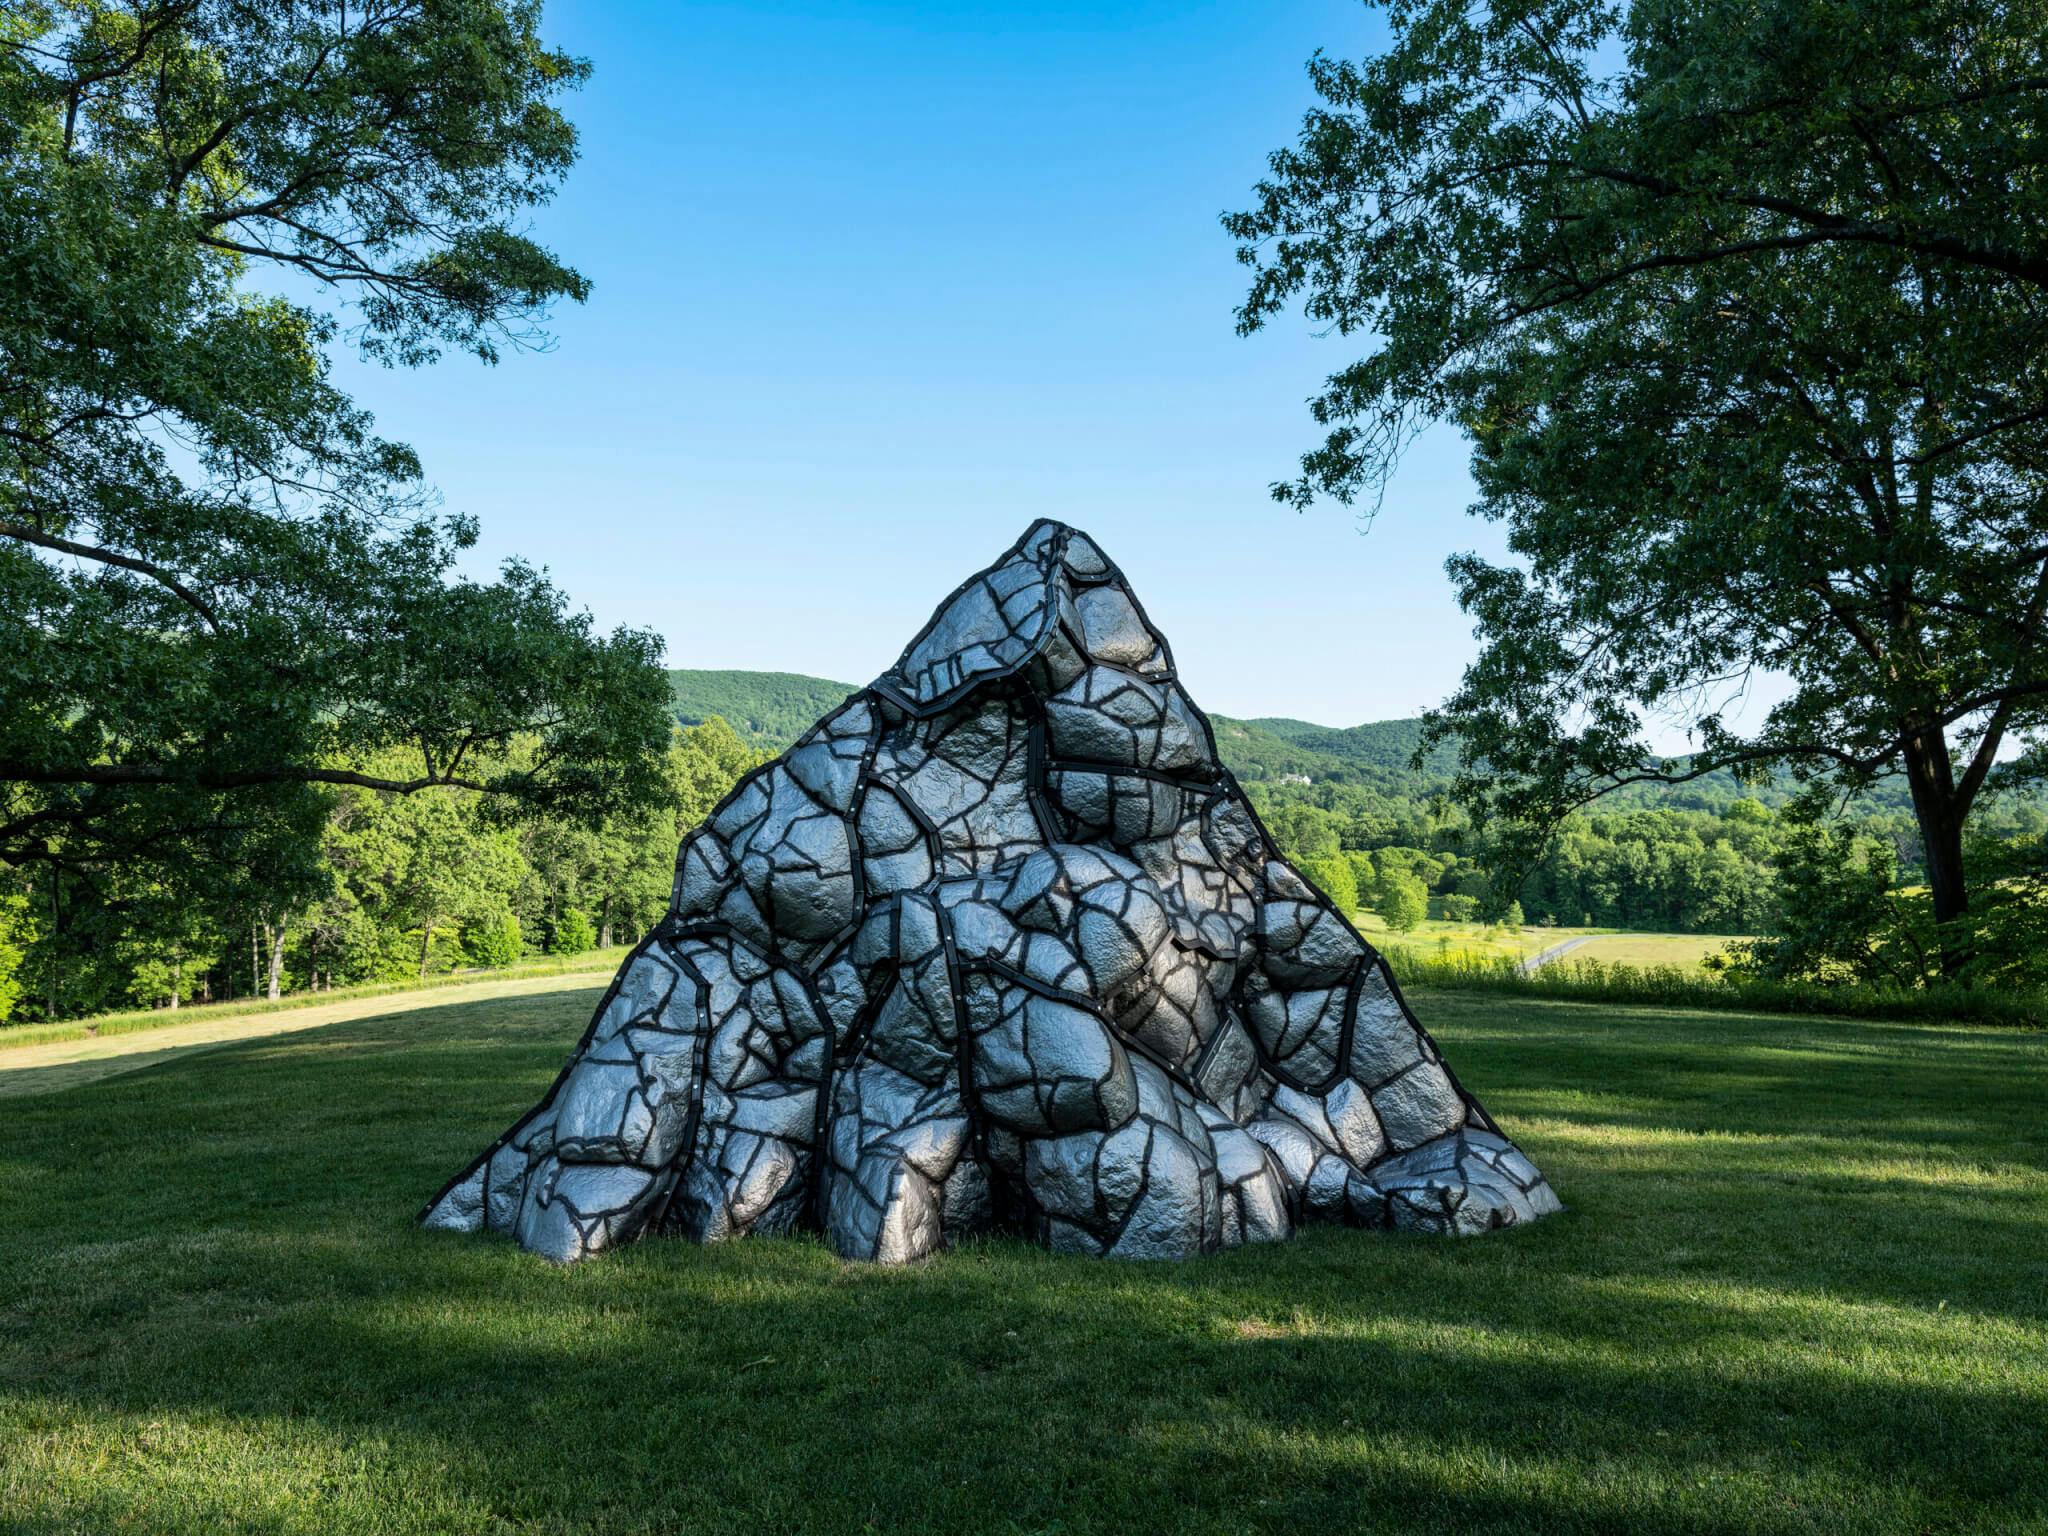 A public art installation representing a volcano stands in a grassy, green park area, between trees.